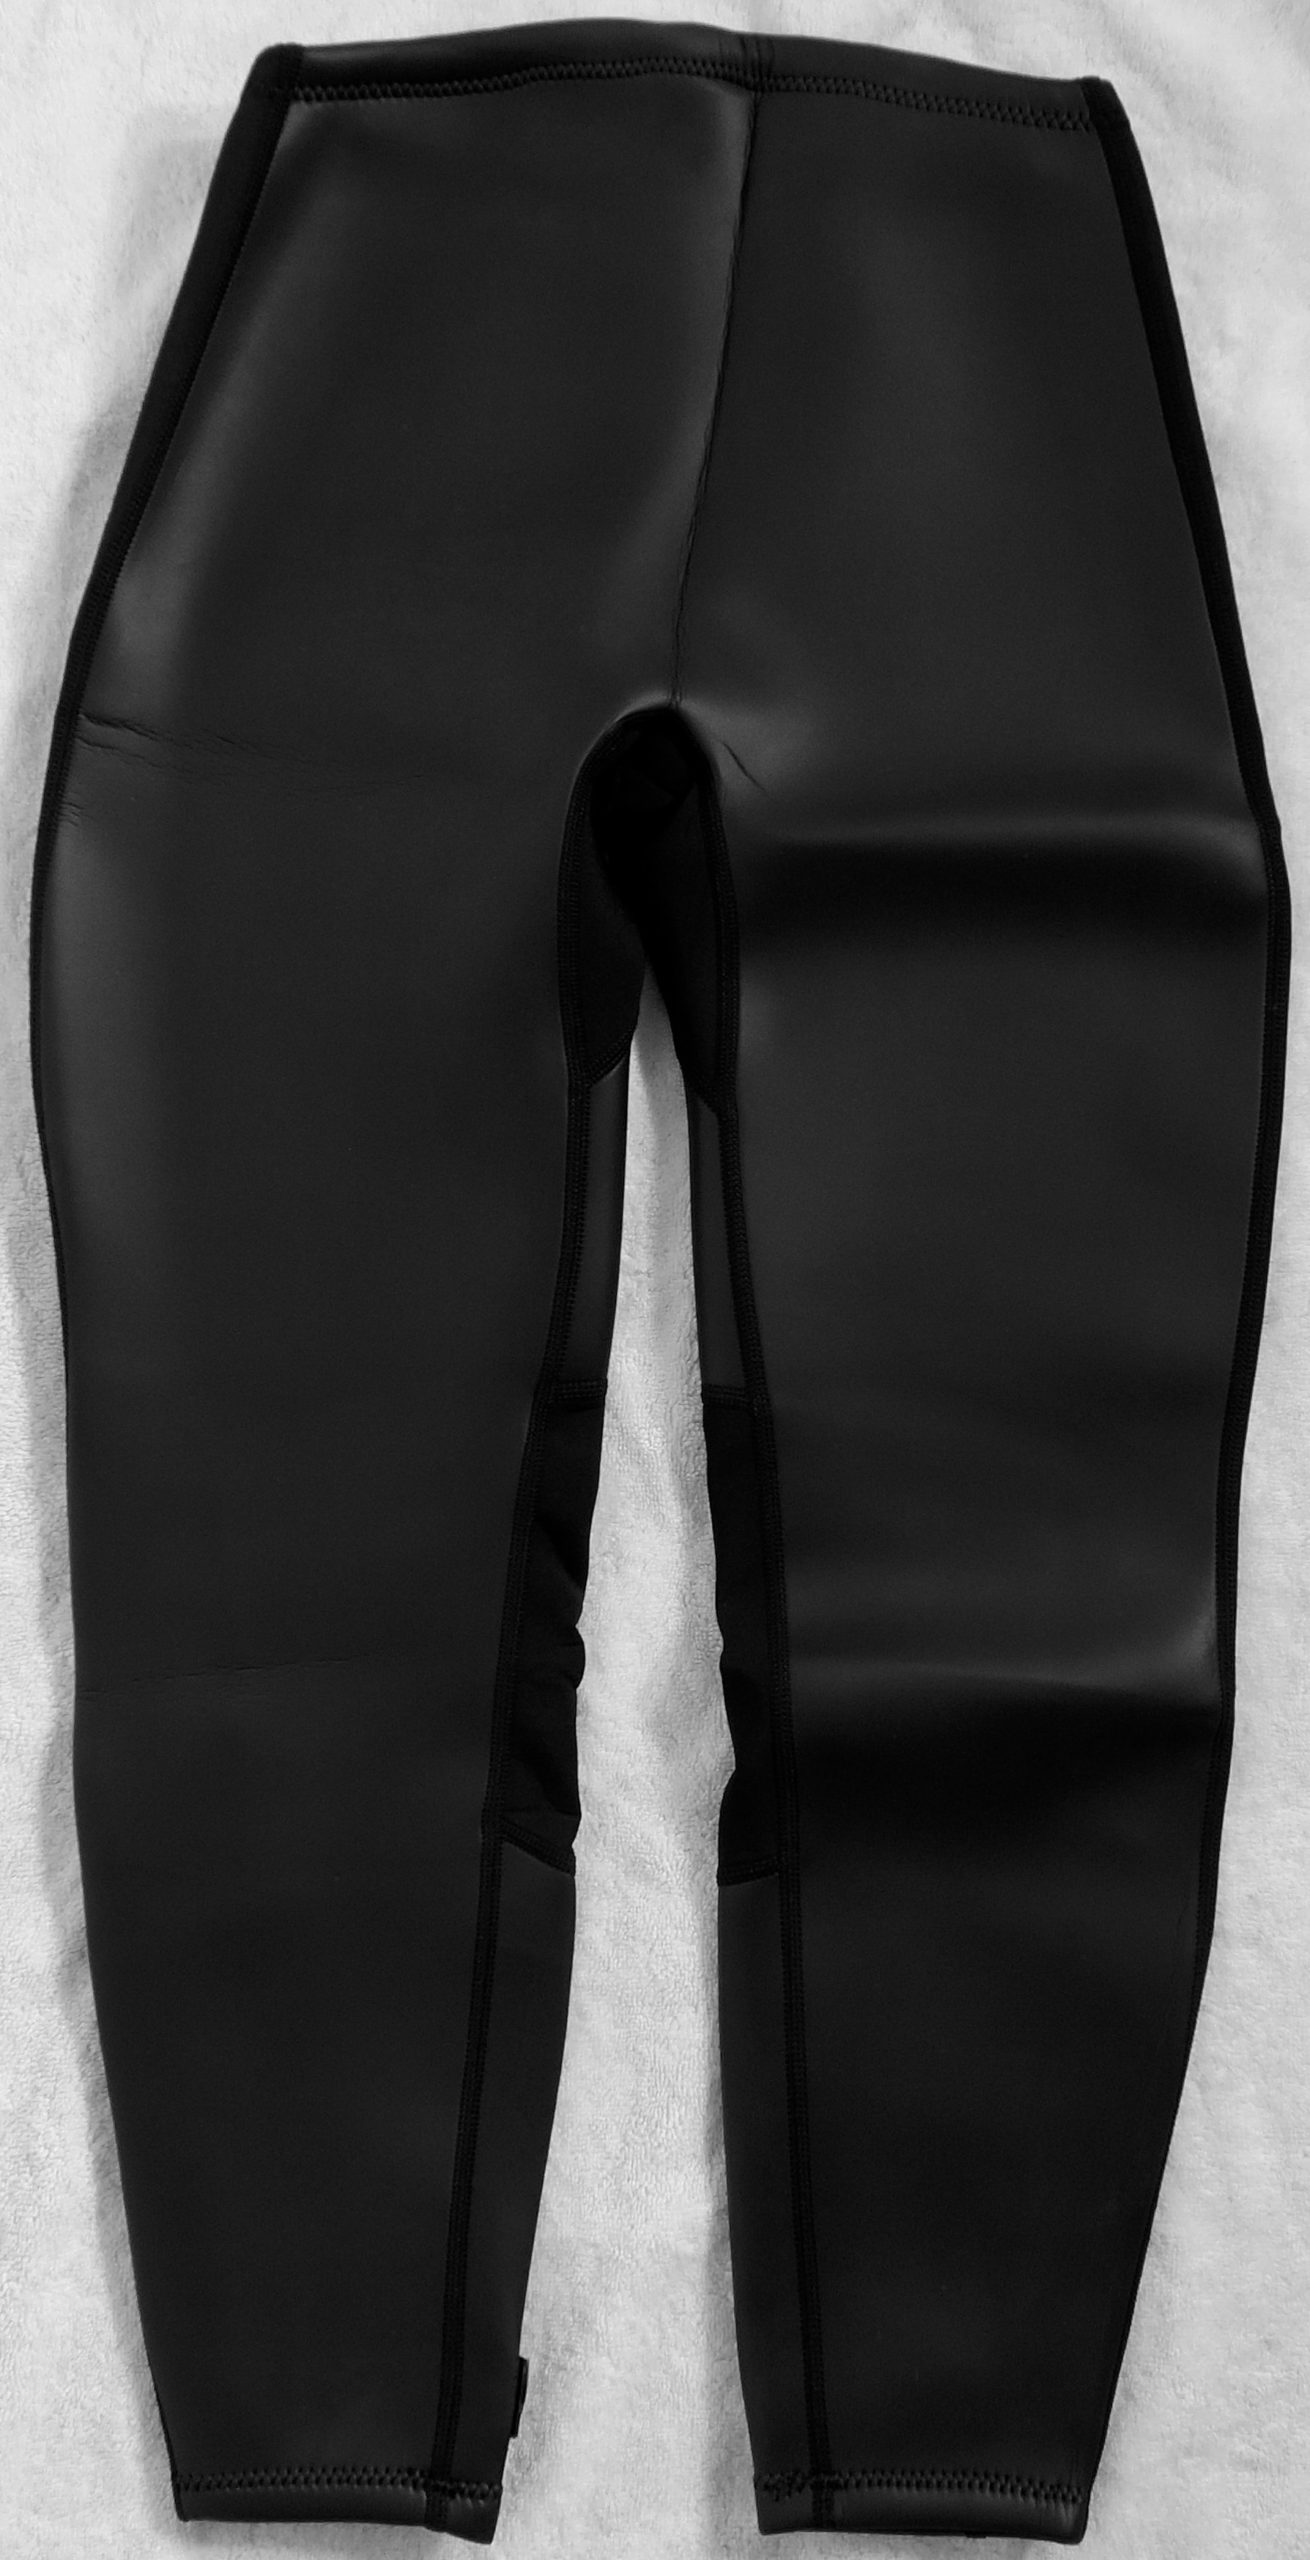 https://www.liquidpeace.net/wp-content/uploads/2015/08/2mm-Smooth-Skin-Wetsuit-Pants-min-2-scaled.jpg